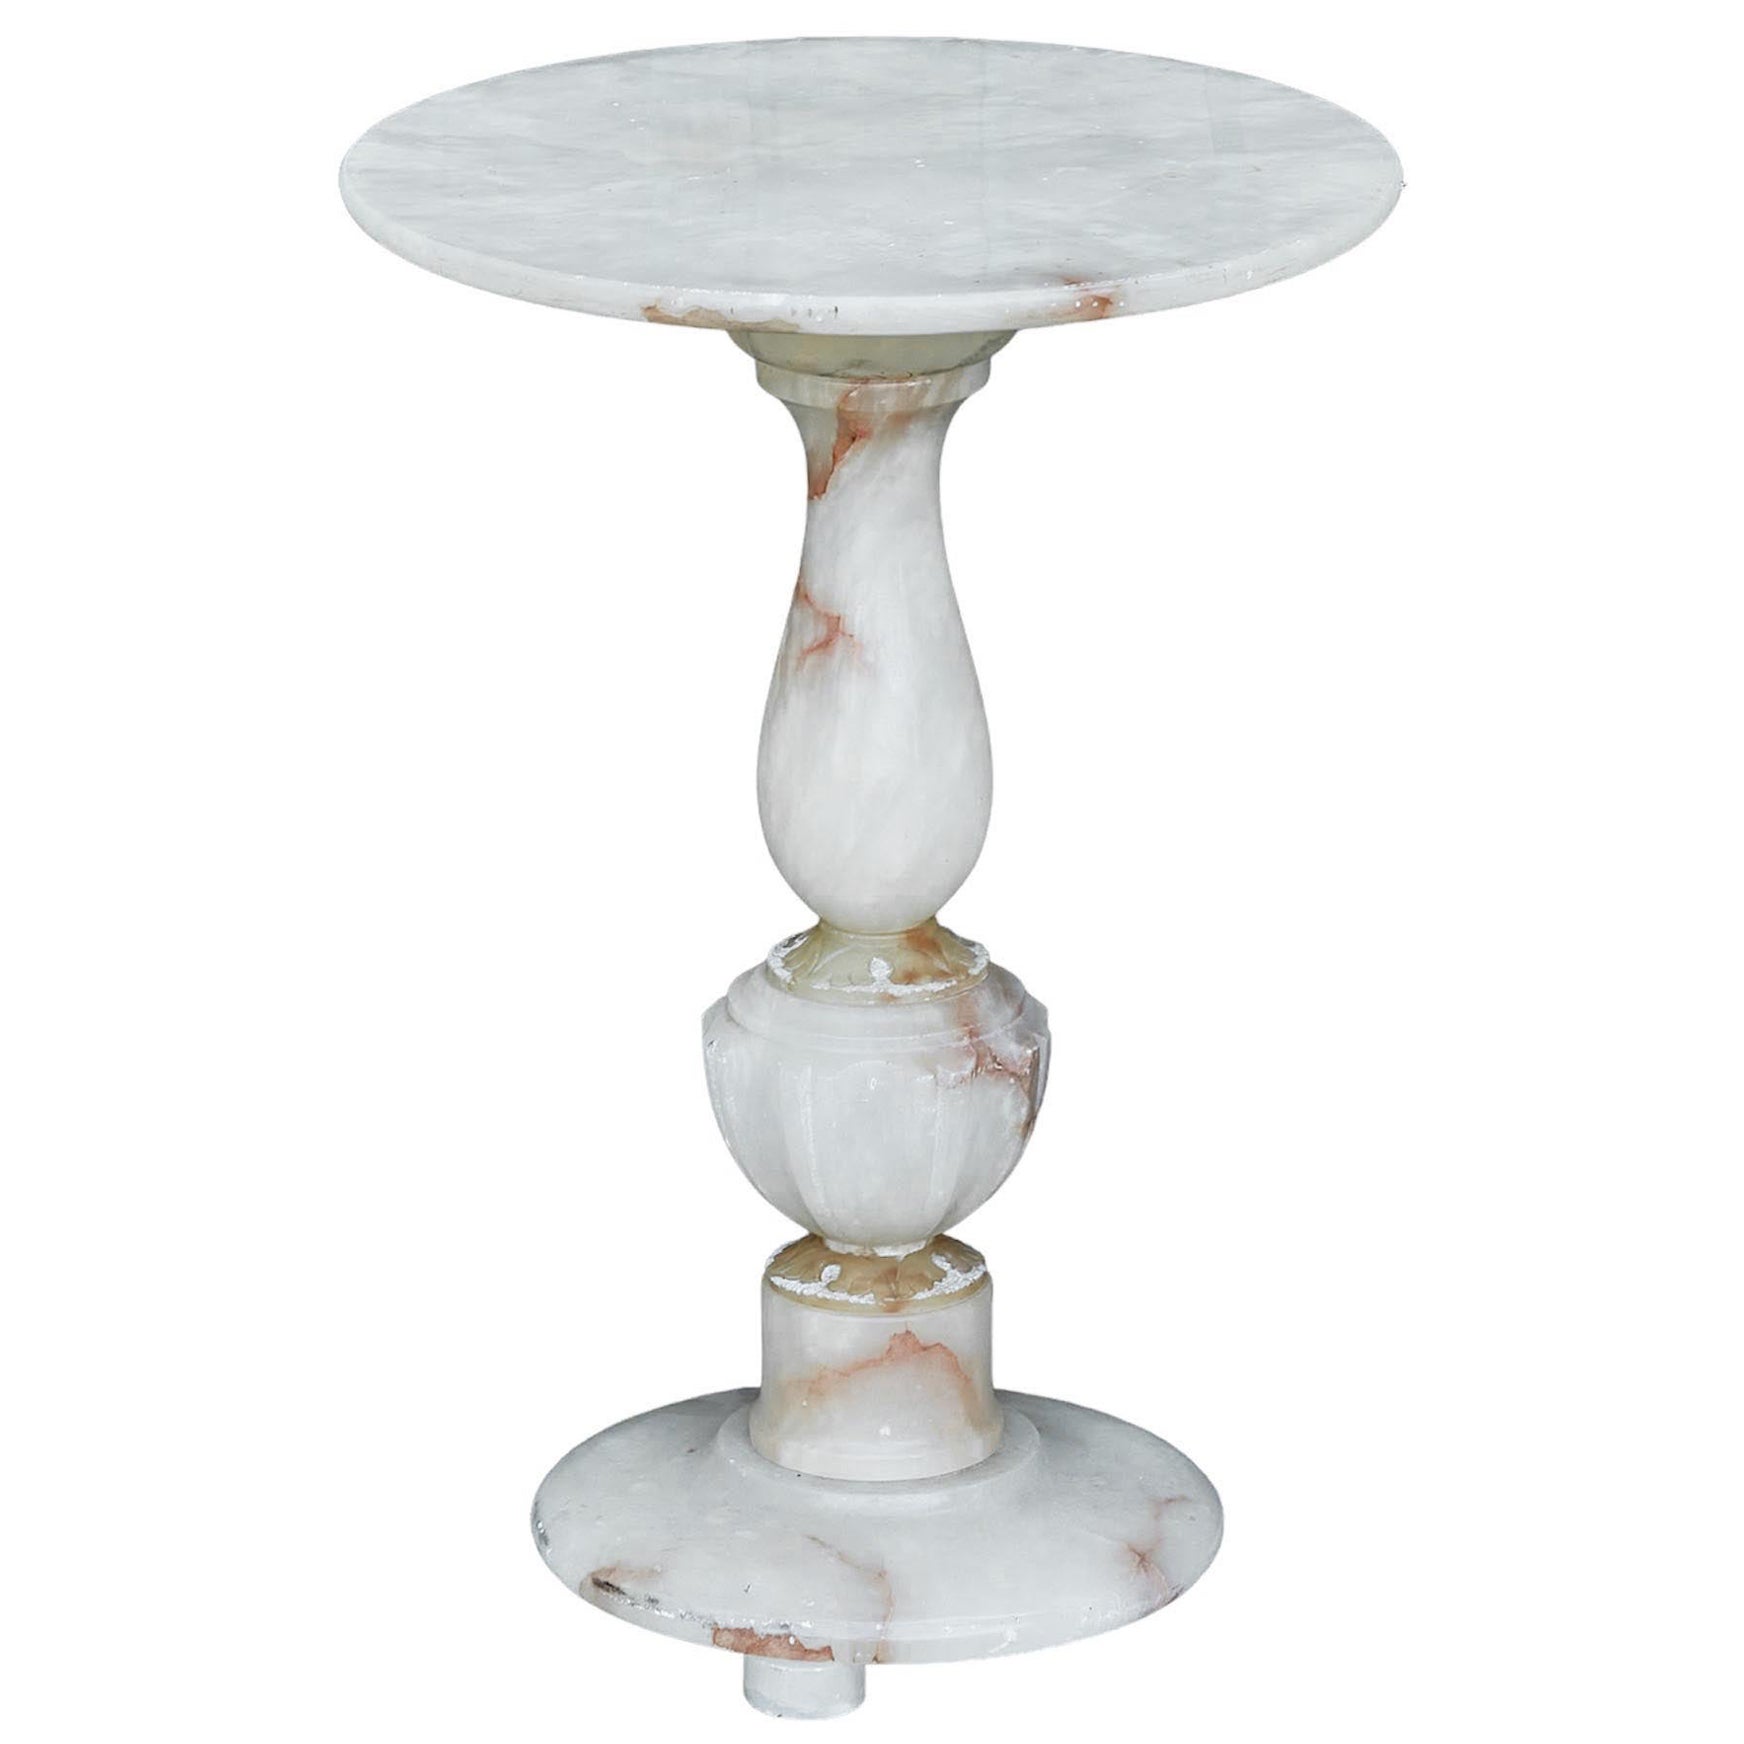 French 1920s Alabaster Guéridon Side Table with Circular Top and Pedestal Base